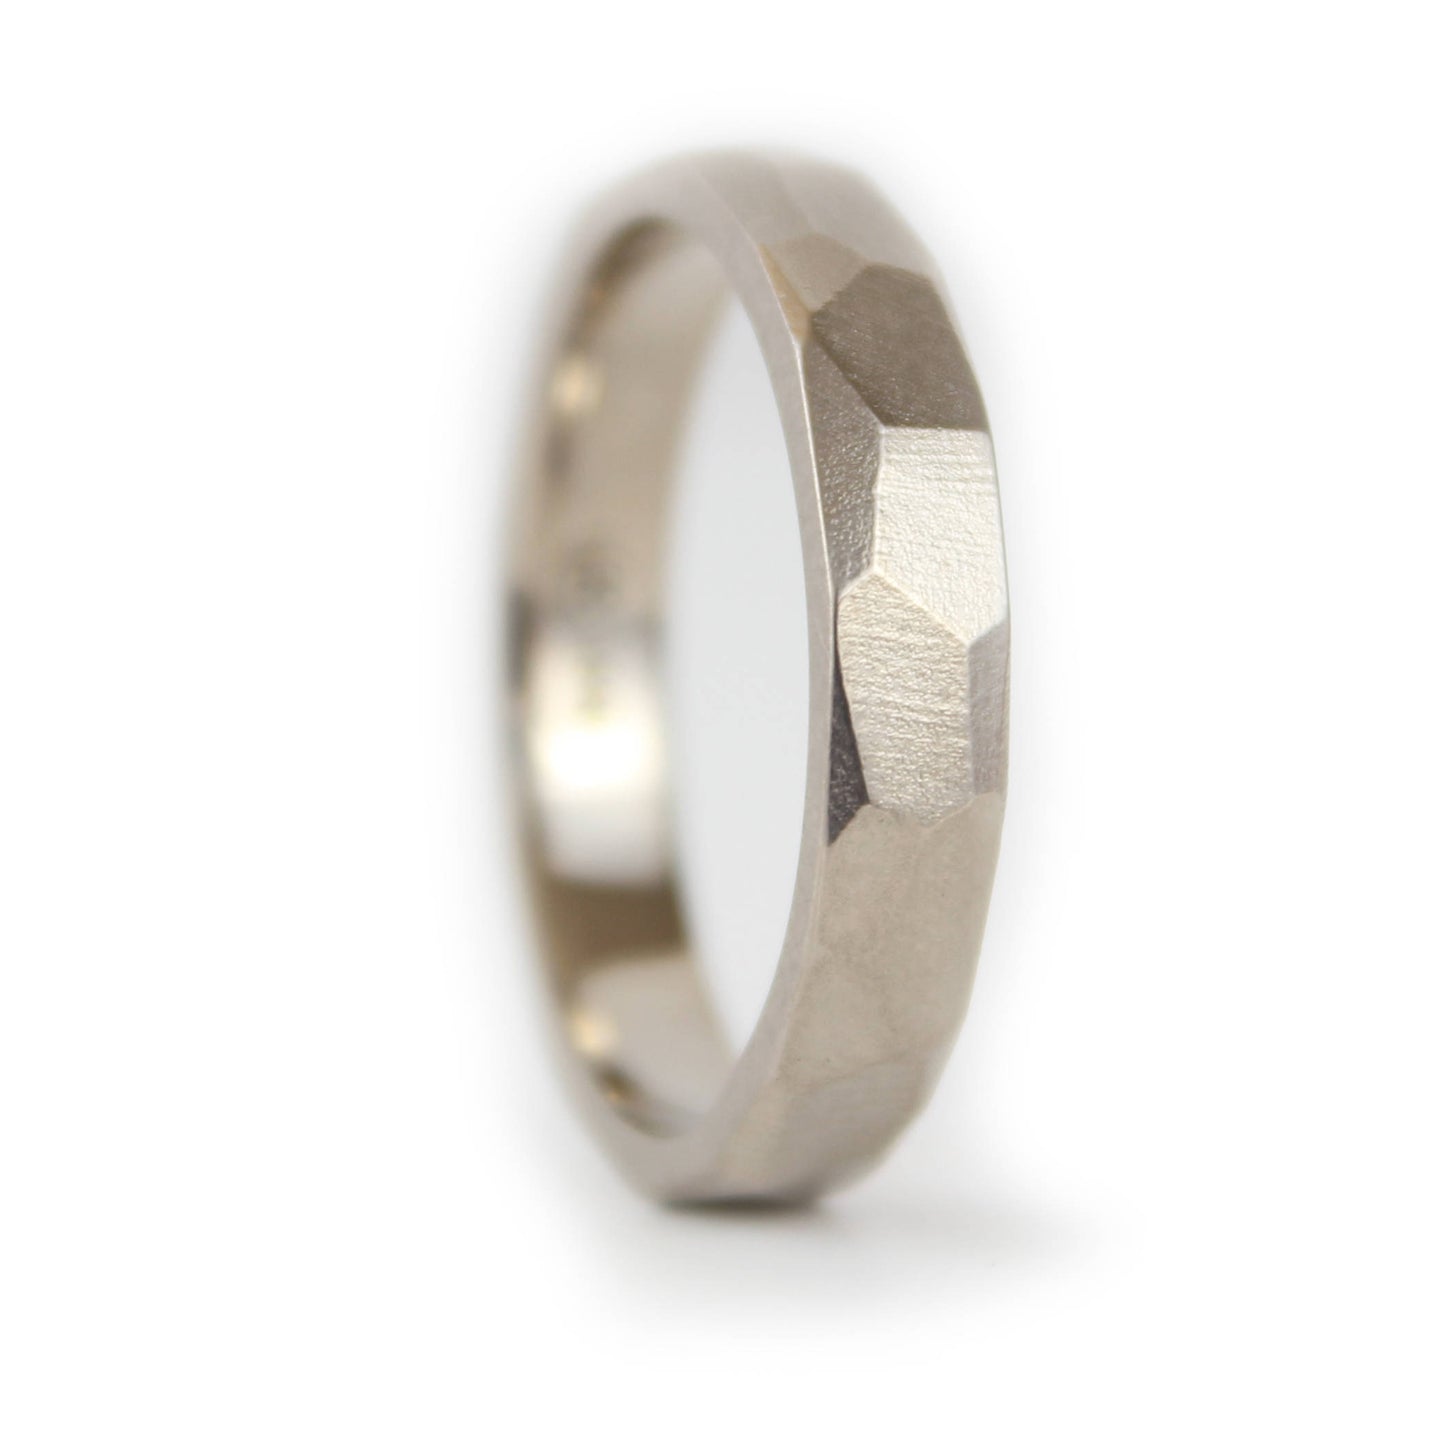 4mm wide Faceted white gold Wedding Ring